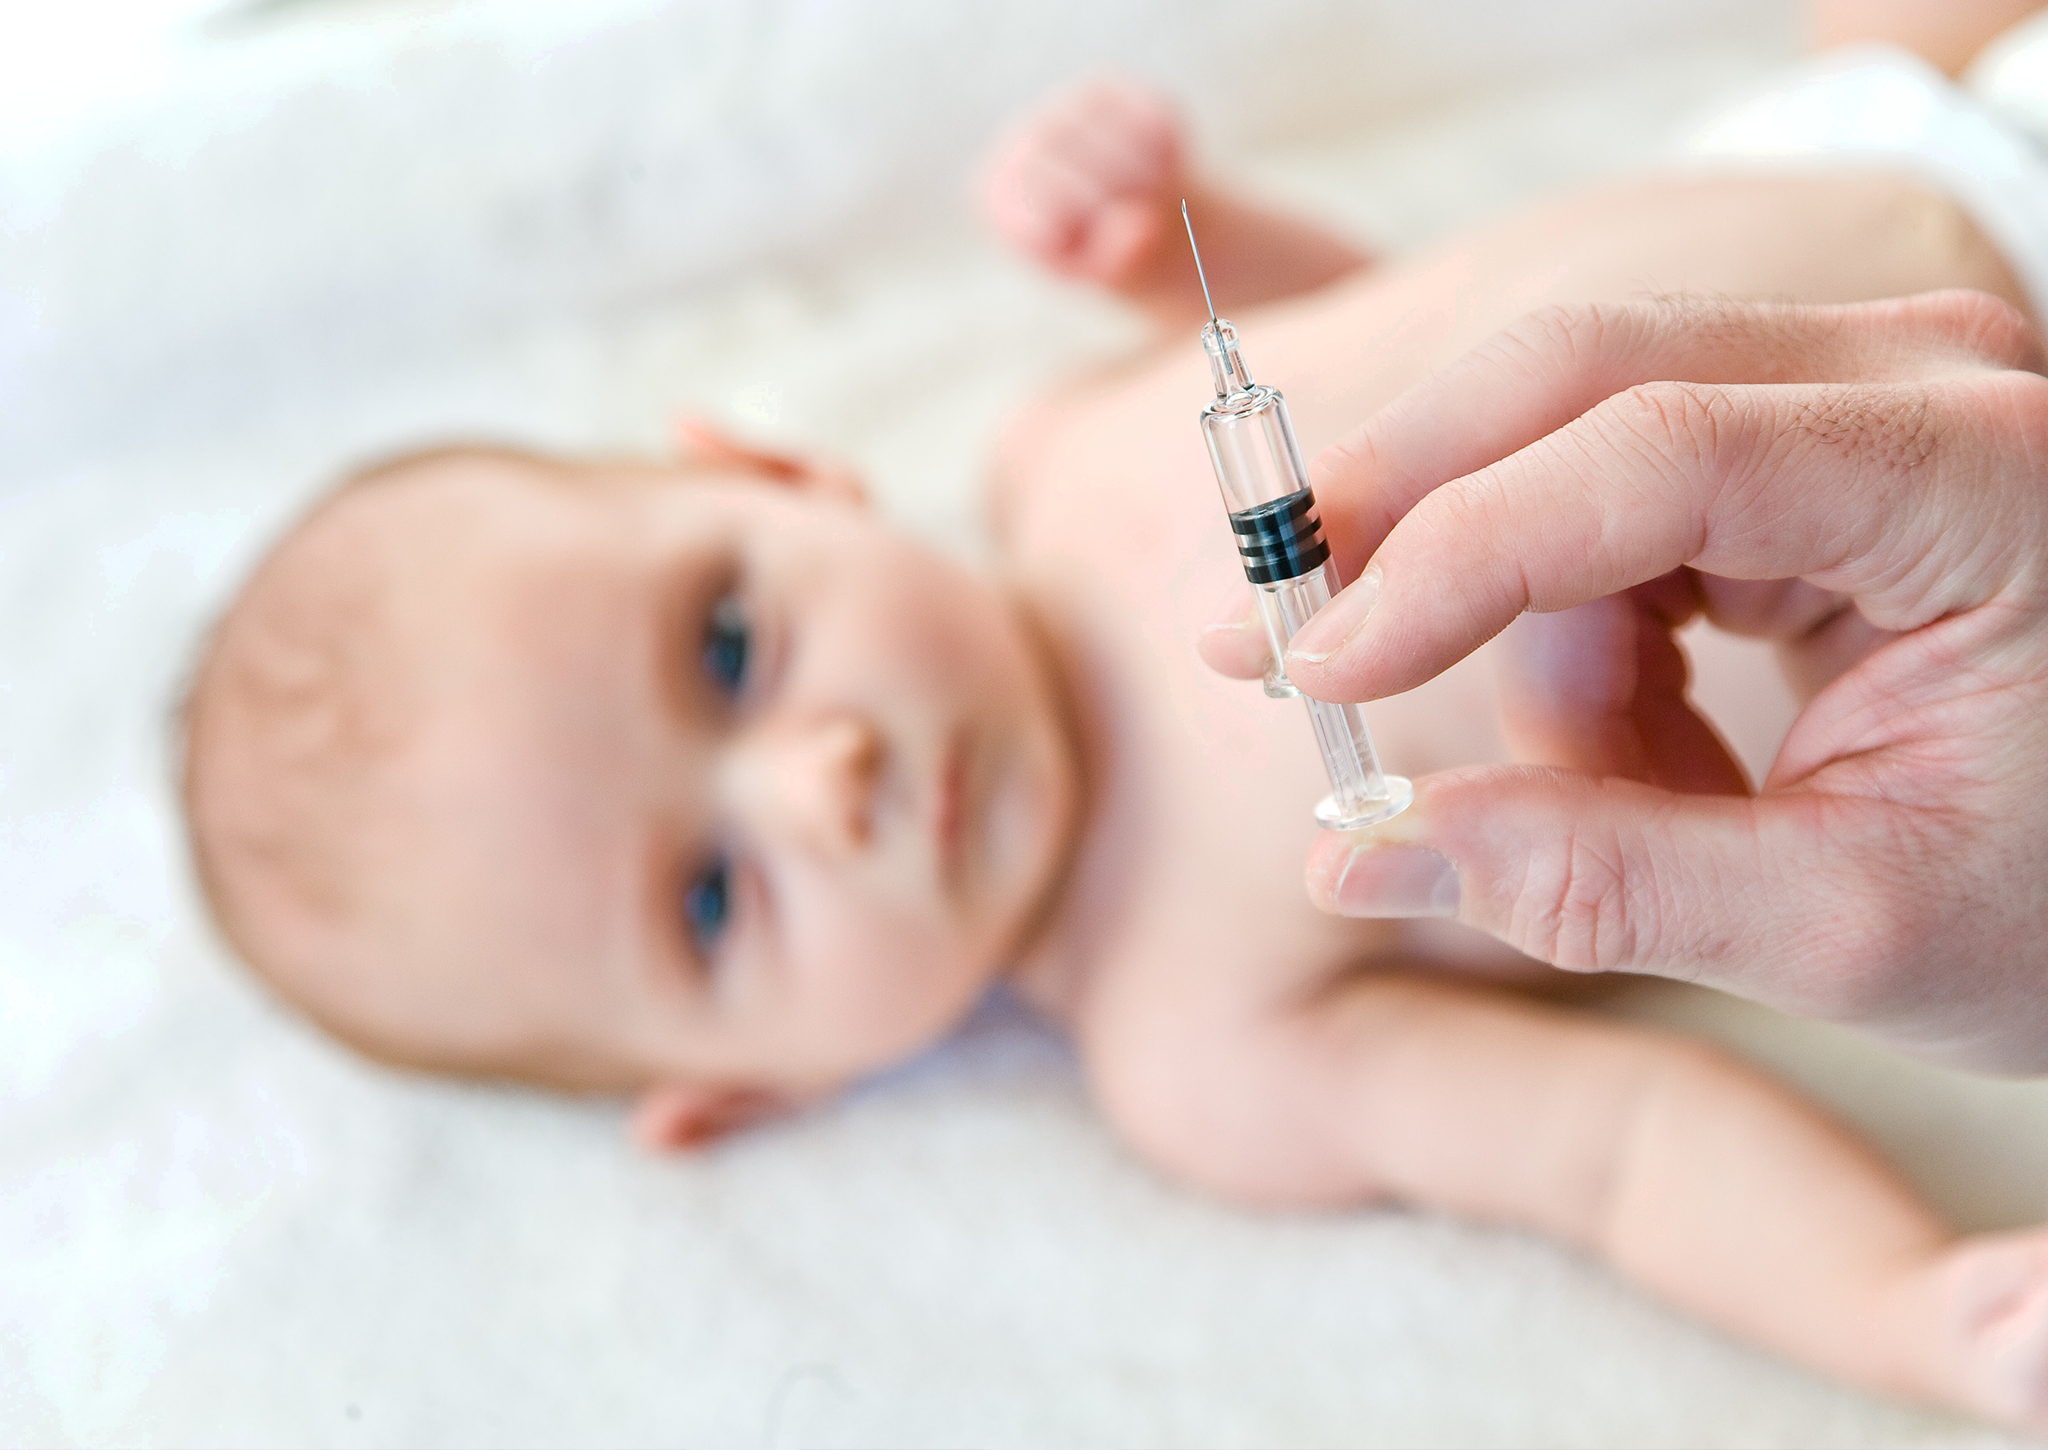 A two-month-old baby receives a vaccination